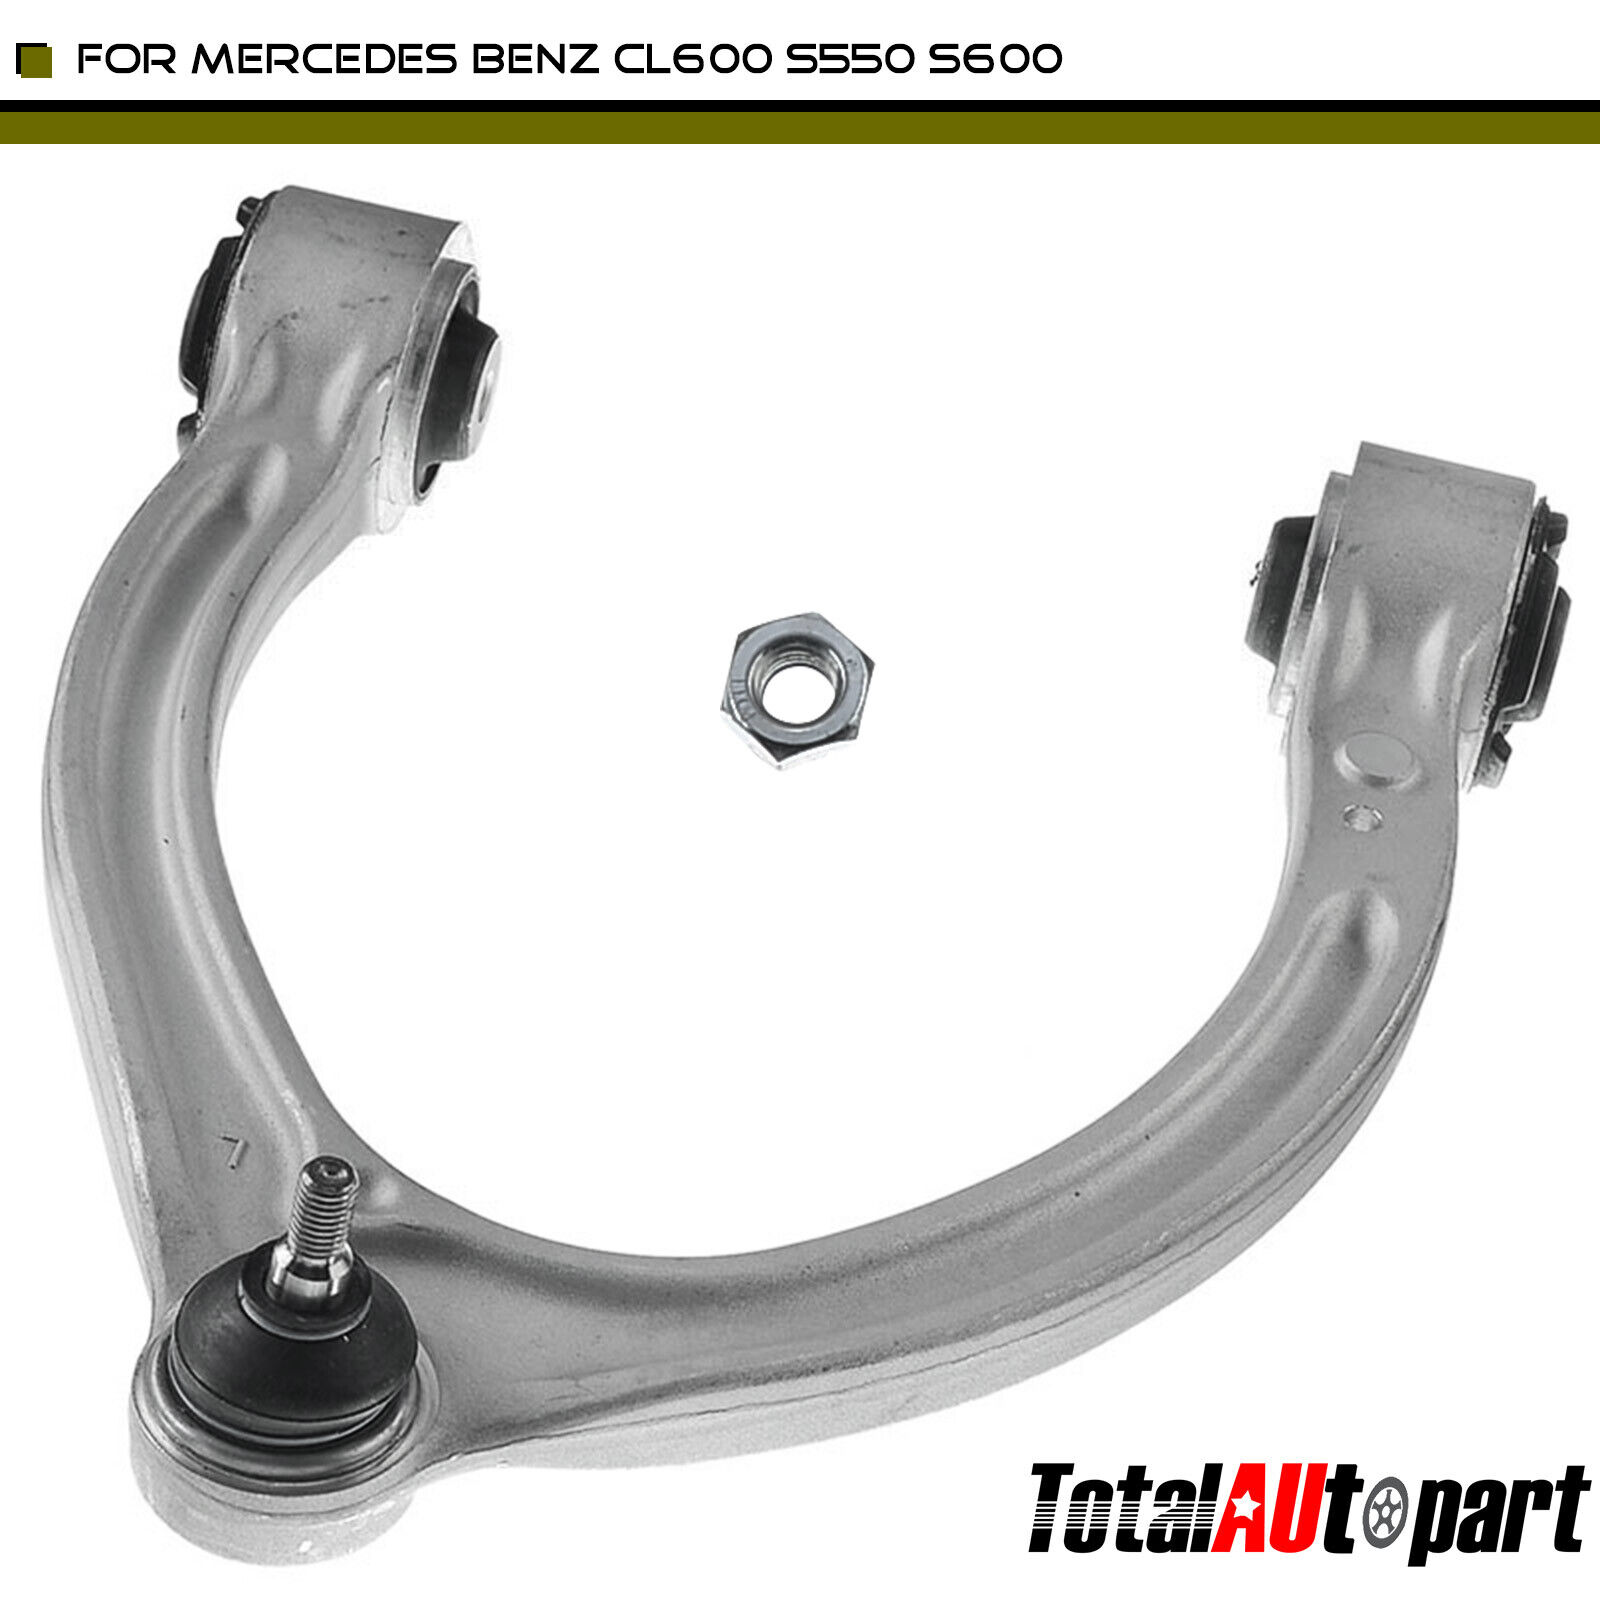 Upper Left Control Arm w/ Ball Joint & Bushing for Mercedes Benz CL600 S550 S600